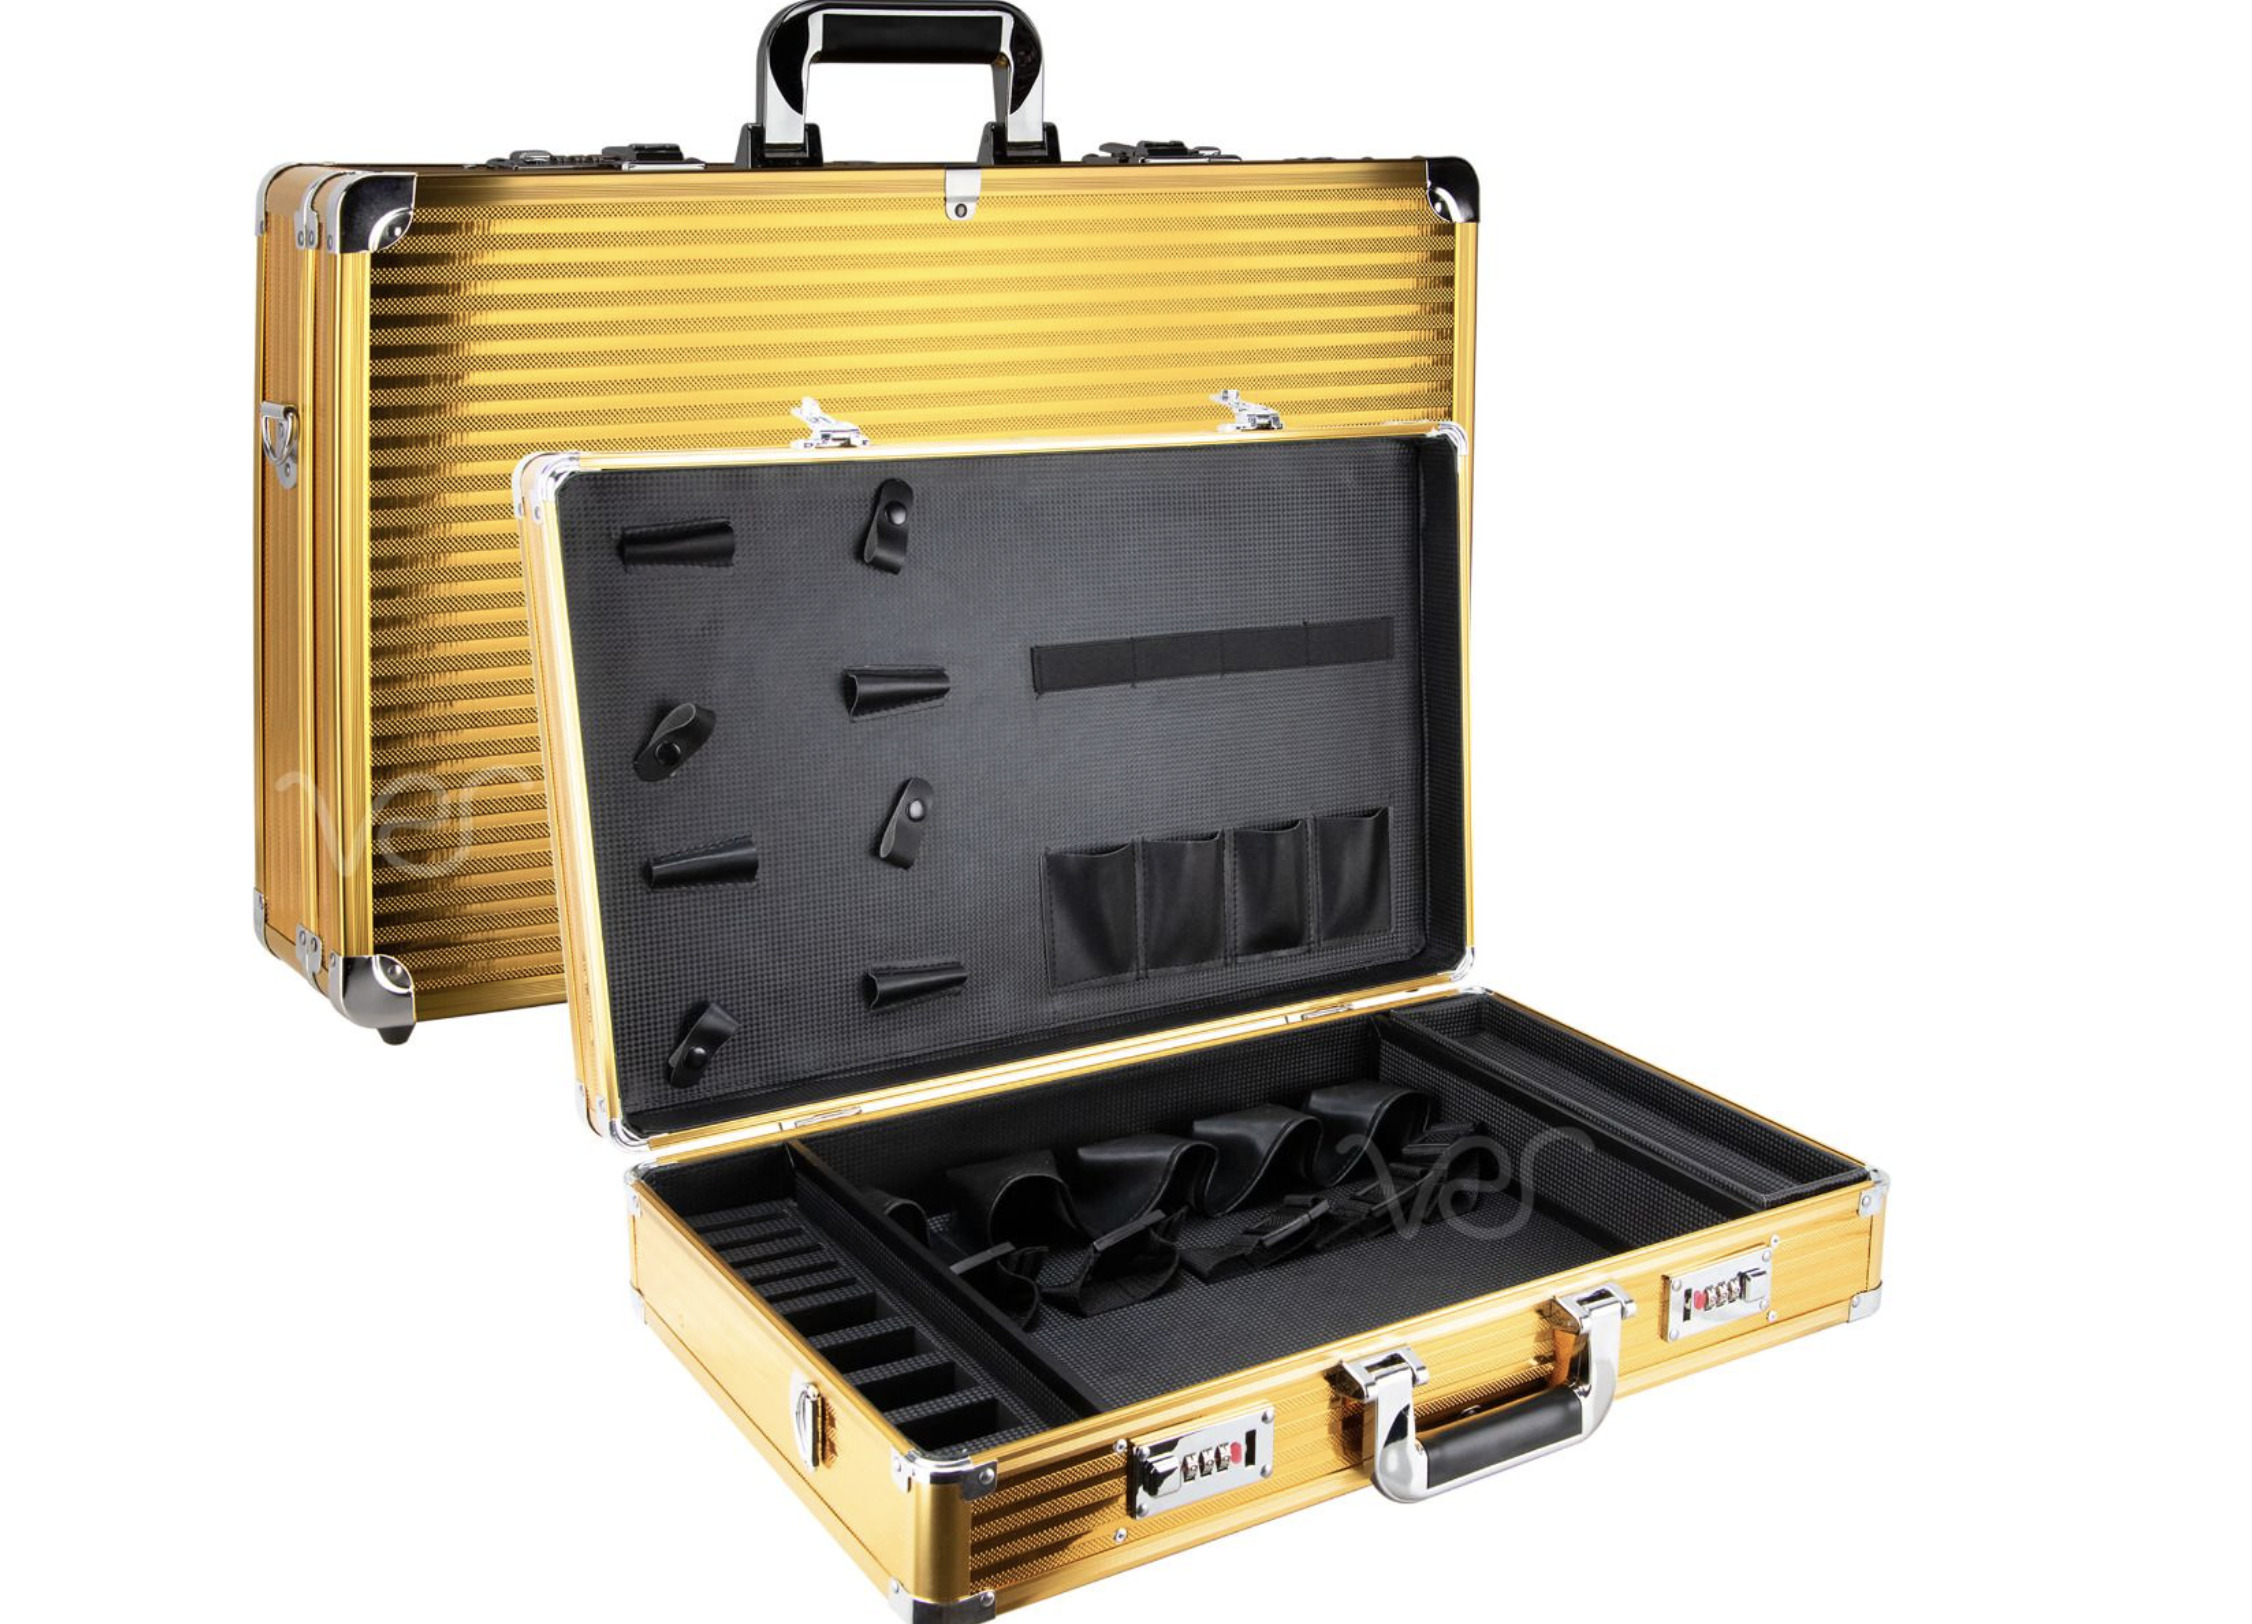 Ver Beauty Barber Case - All Gold